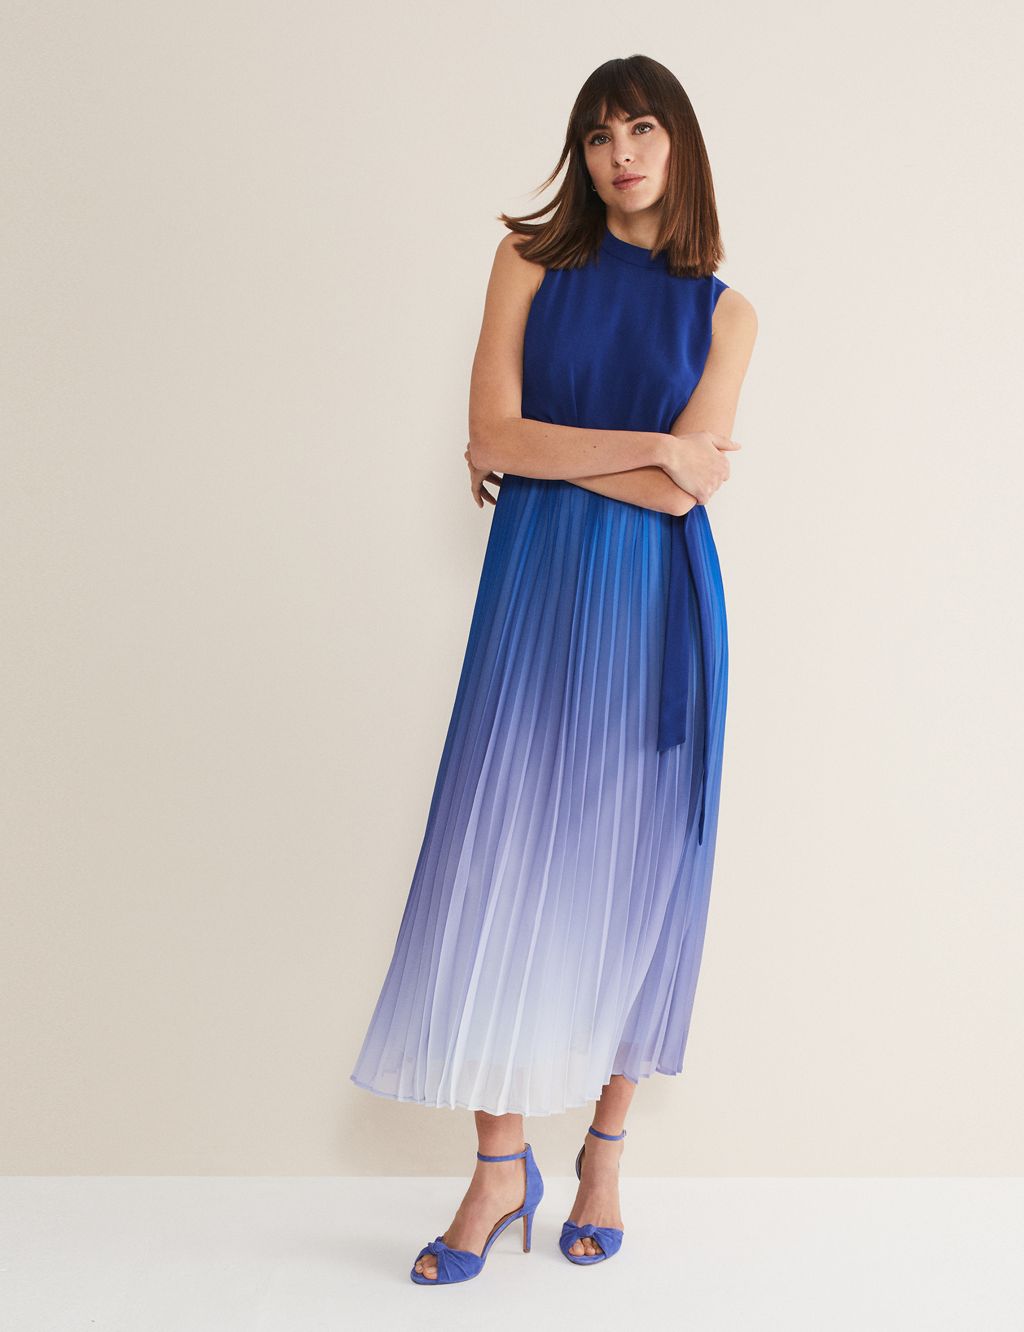 Ombre High Neck Pleated Maxi Waisted Dress image 1